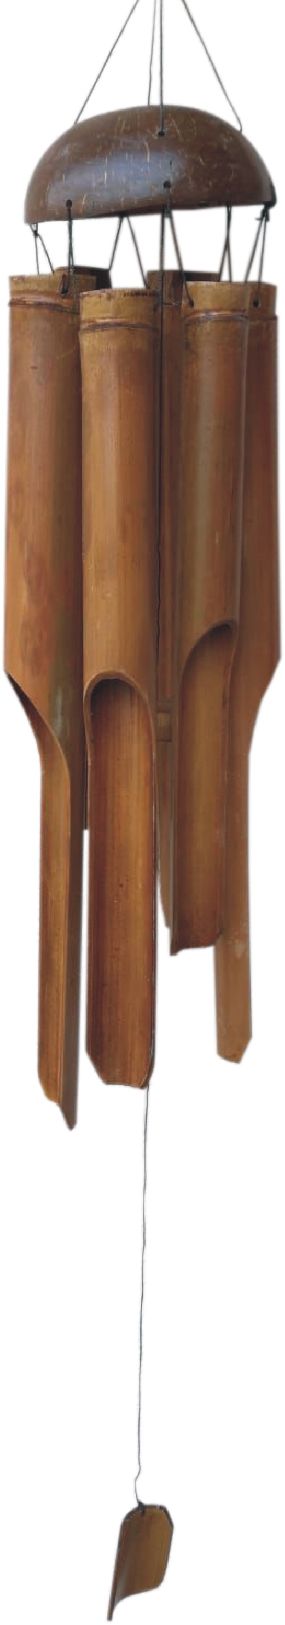 BAMBOO WIND CHIMES 50 CM